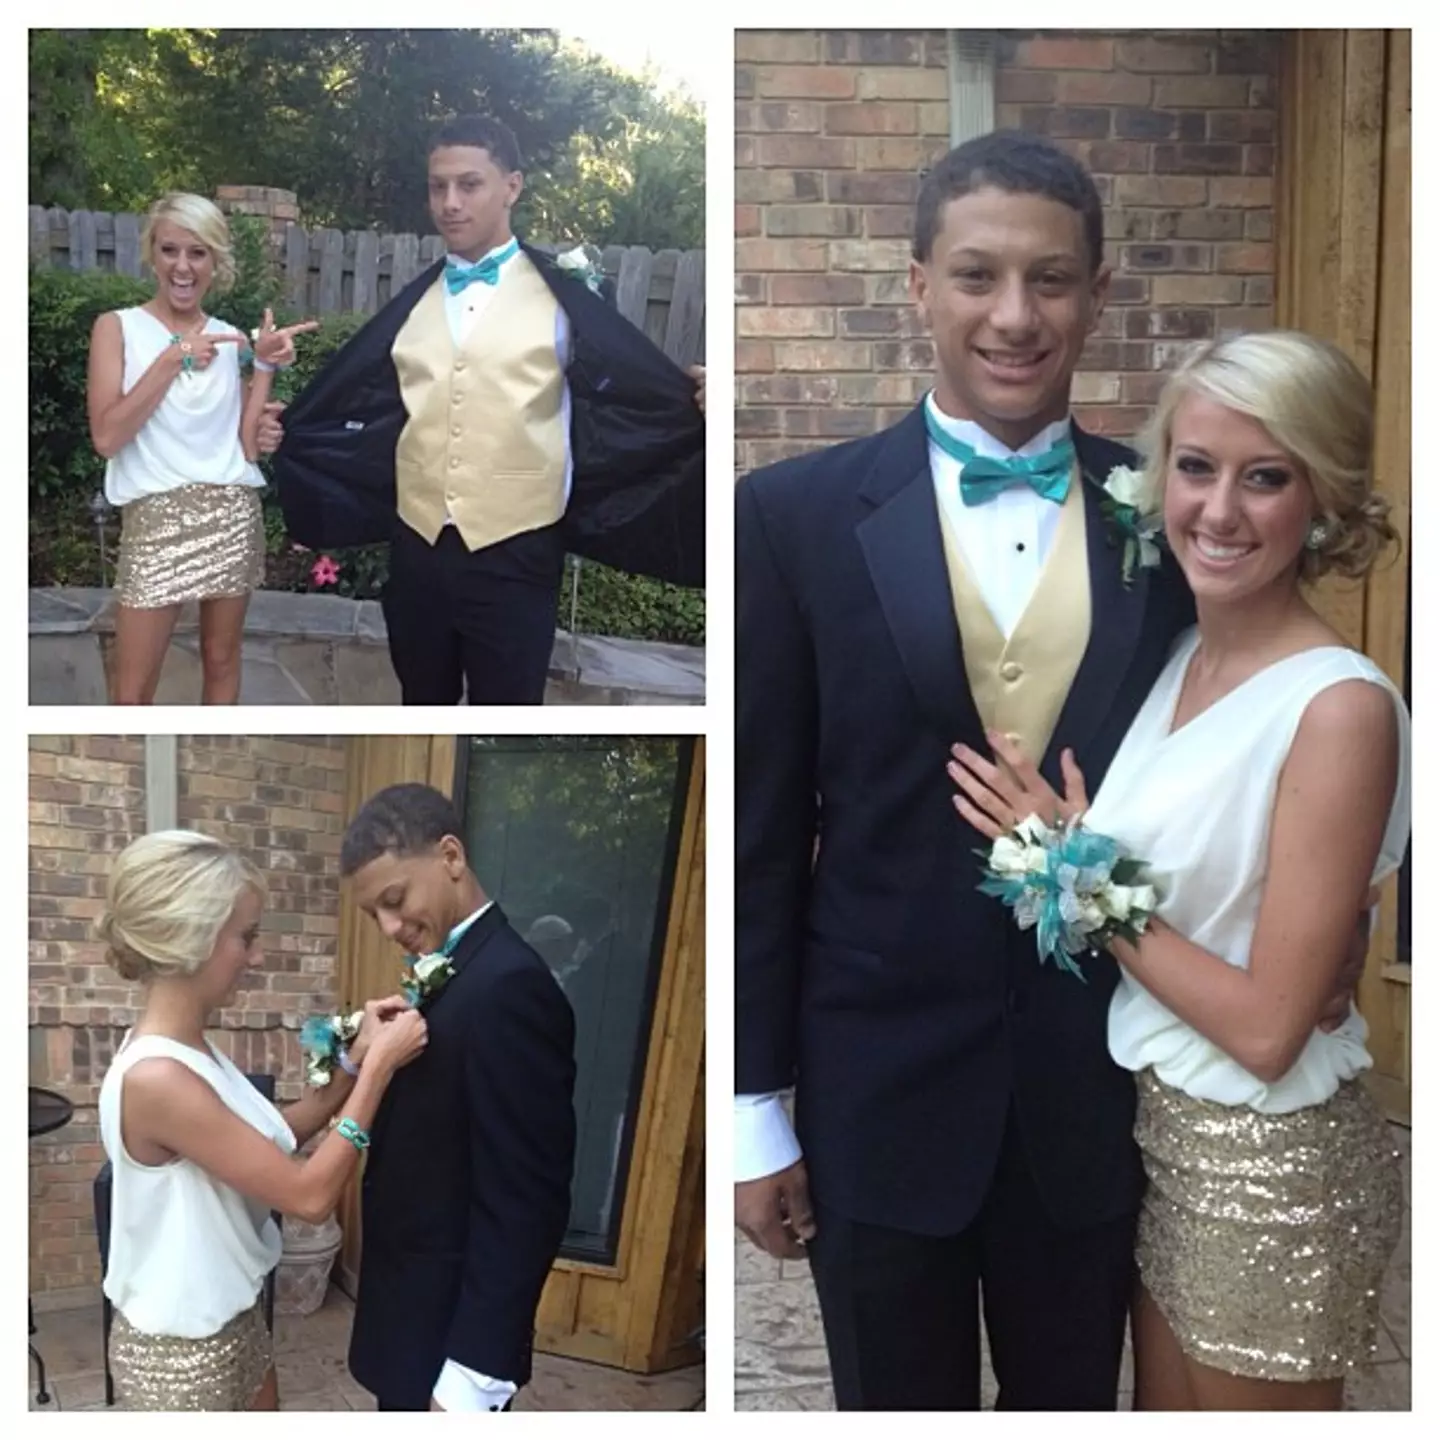 Patrick and Brittany attended prom together in 2013.